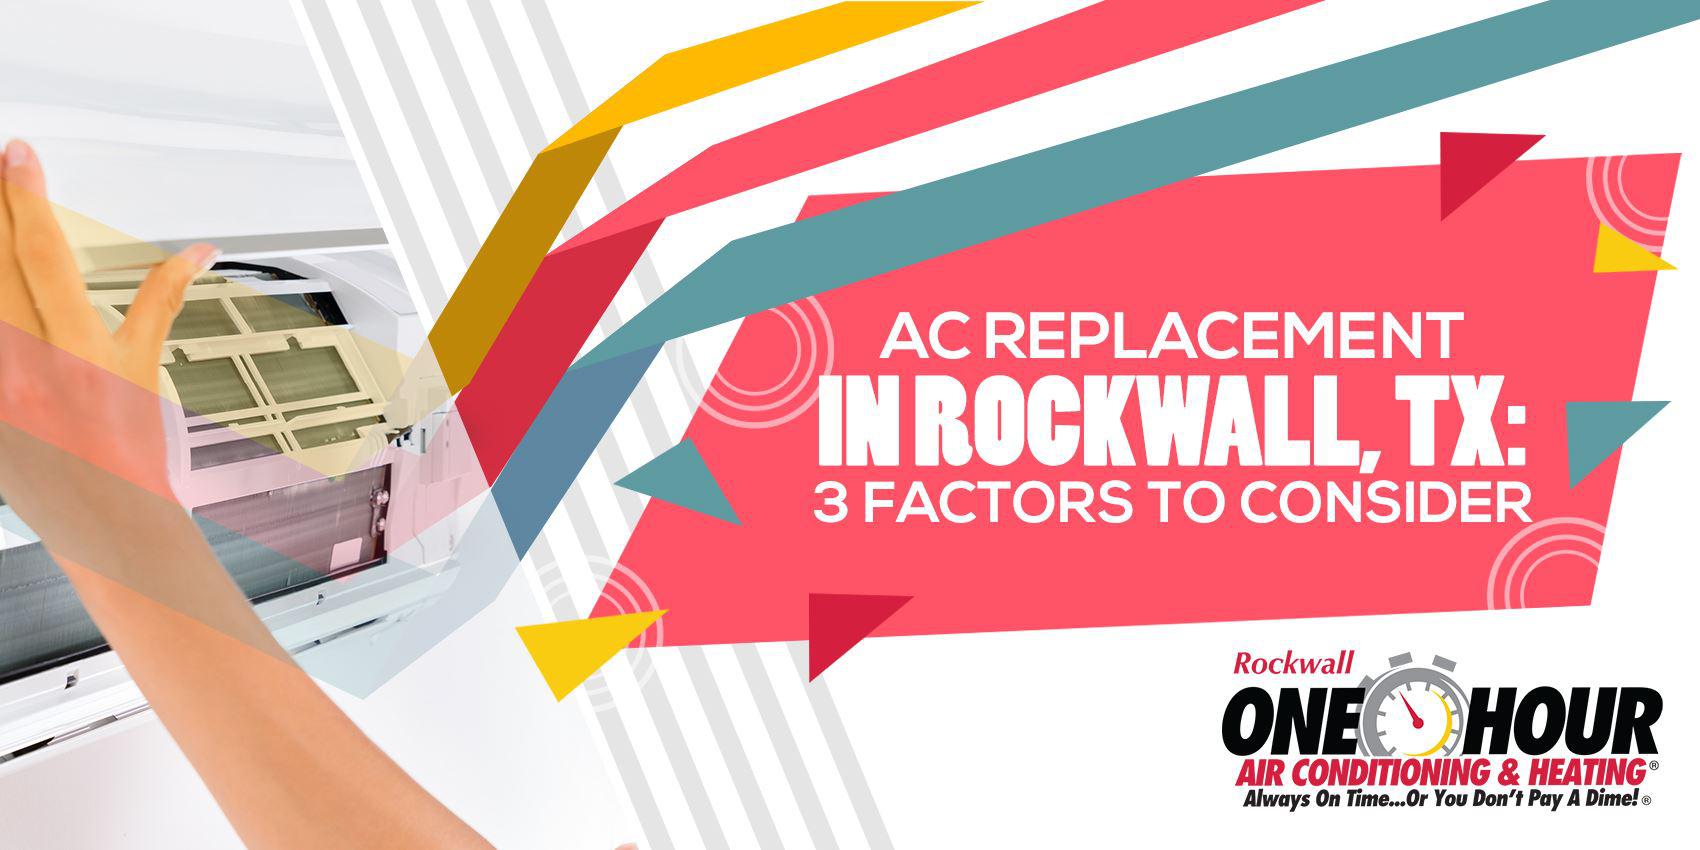 A/C Replacement in Rockwall, TX: 3 Factors to Consider